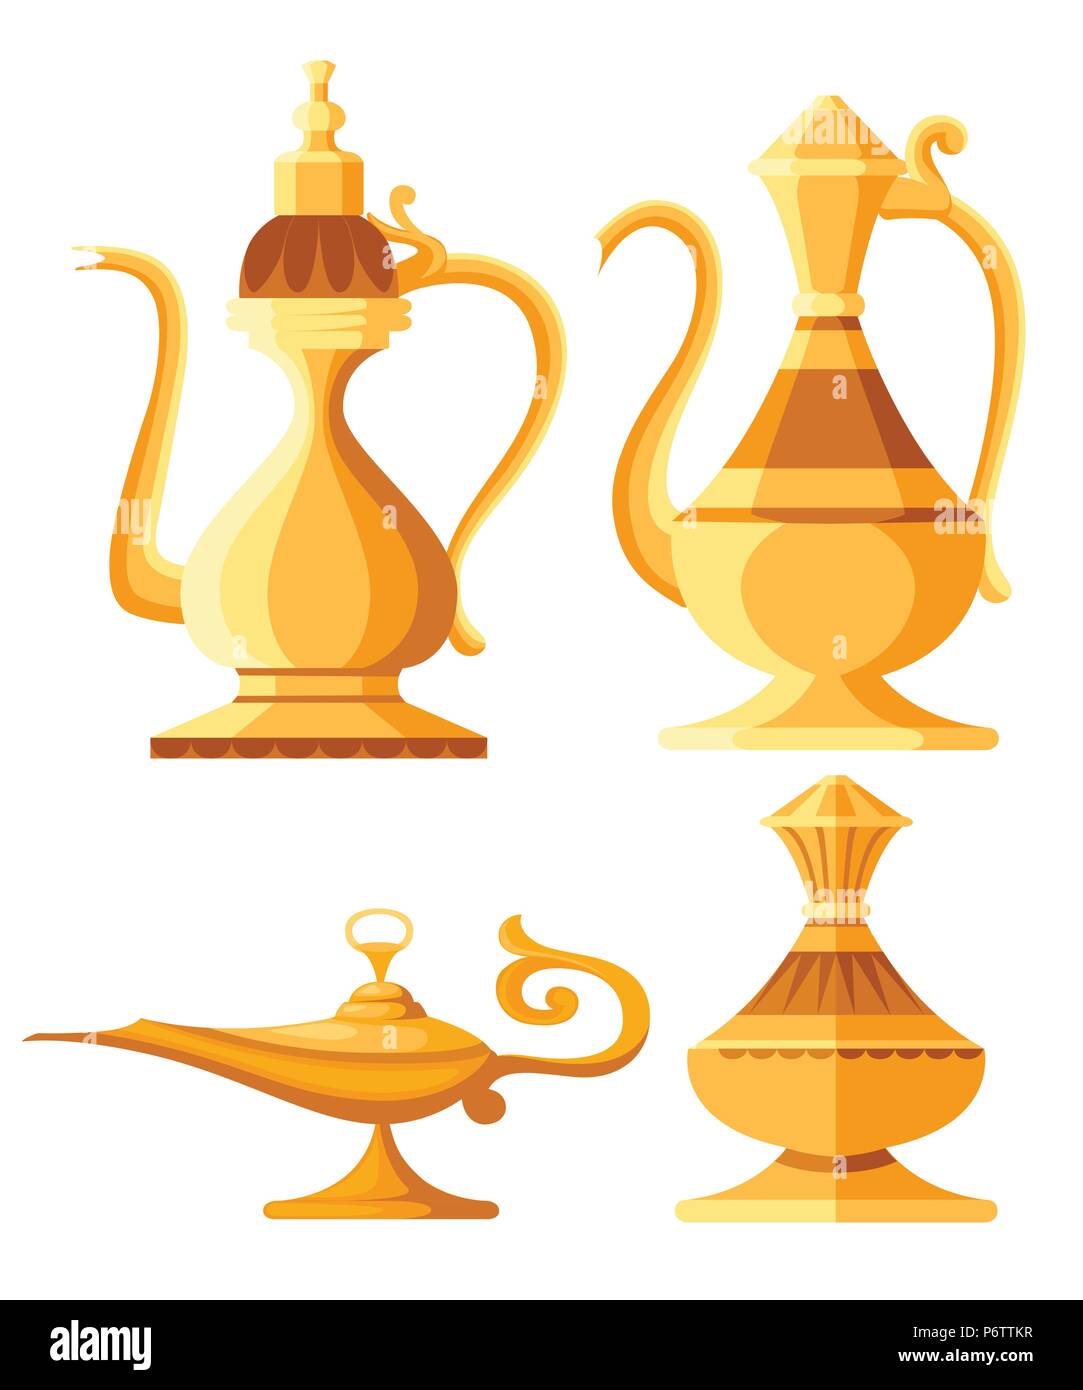 Set of arabic jug and oil lamp illustration. Aladdin magic or genie lamp. Flat style vector illustration. Isolated on white background. Stock Vector